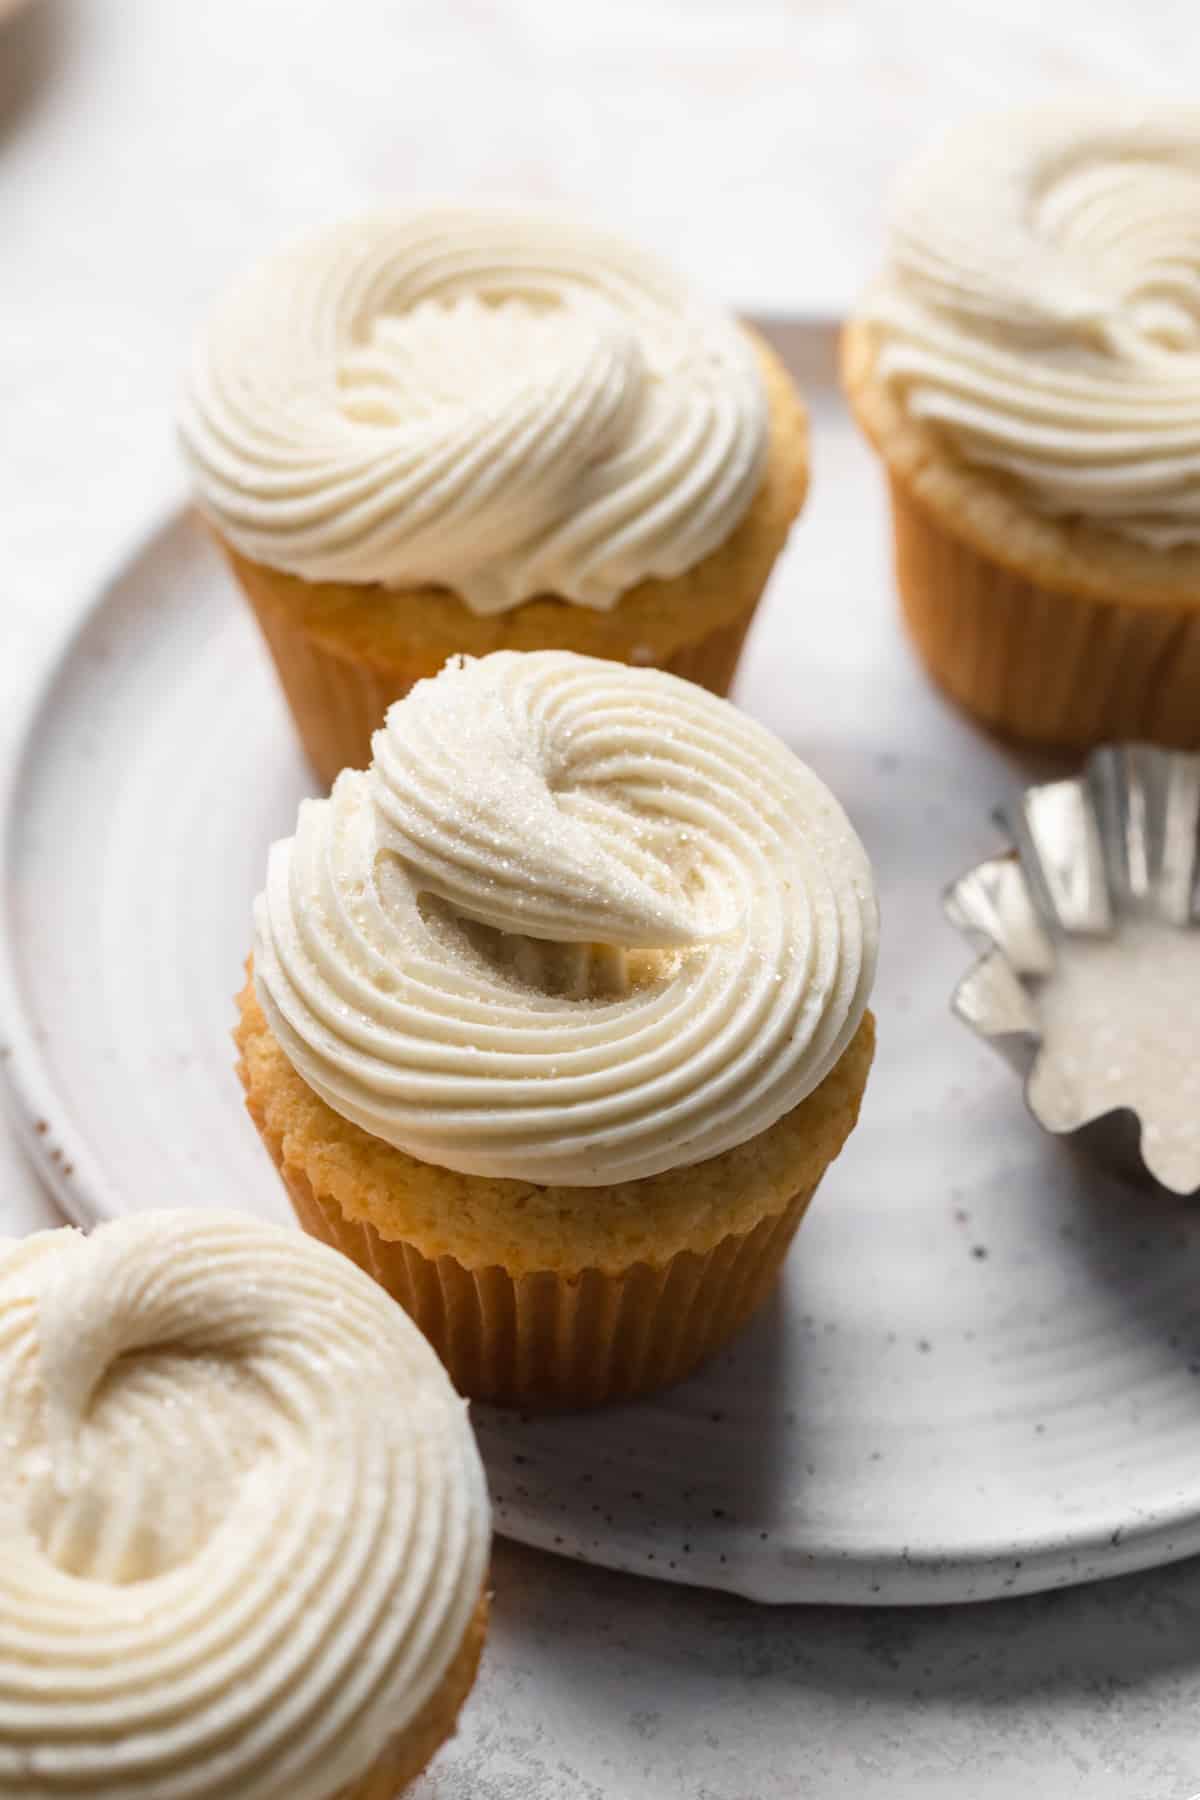 A small batch of 6 vanilla cupcakes on a plate.